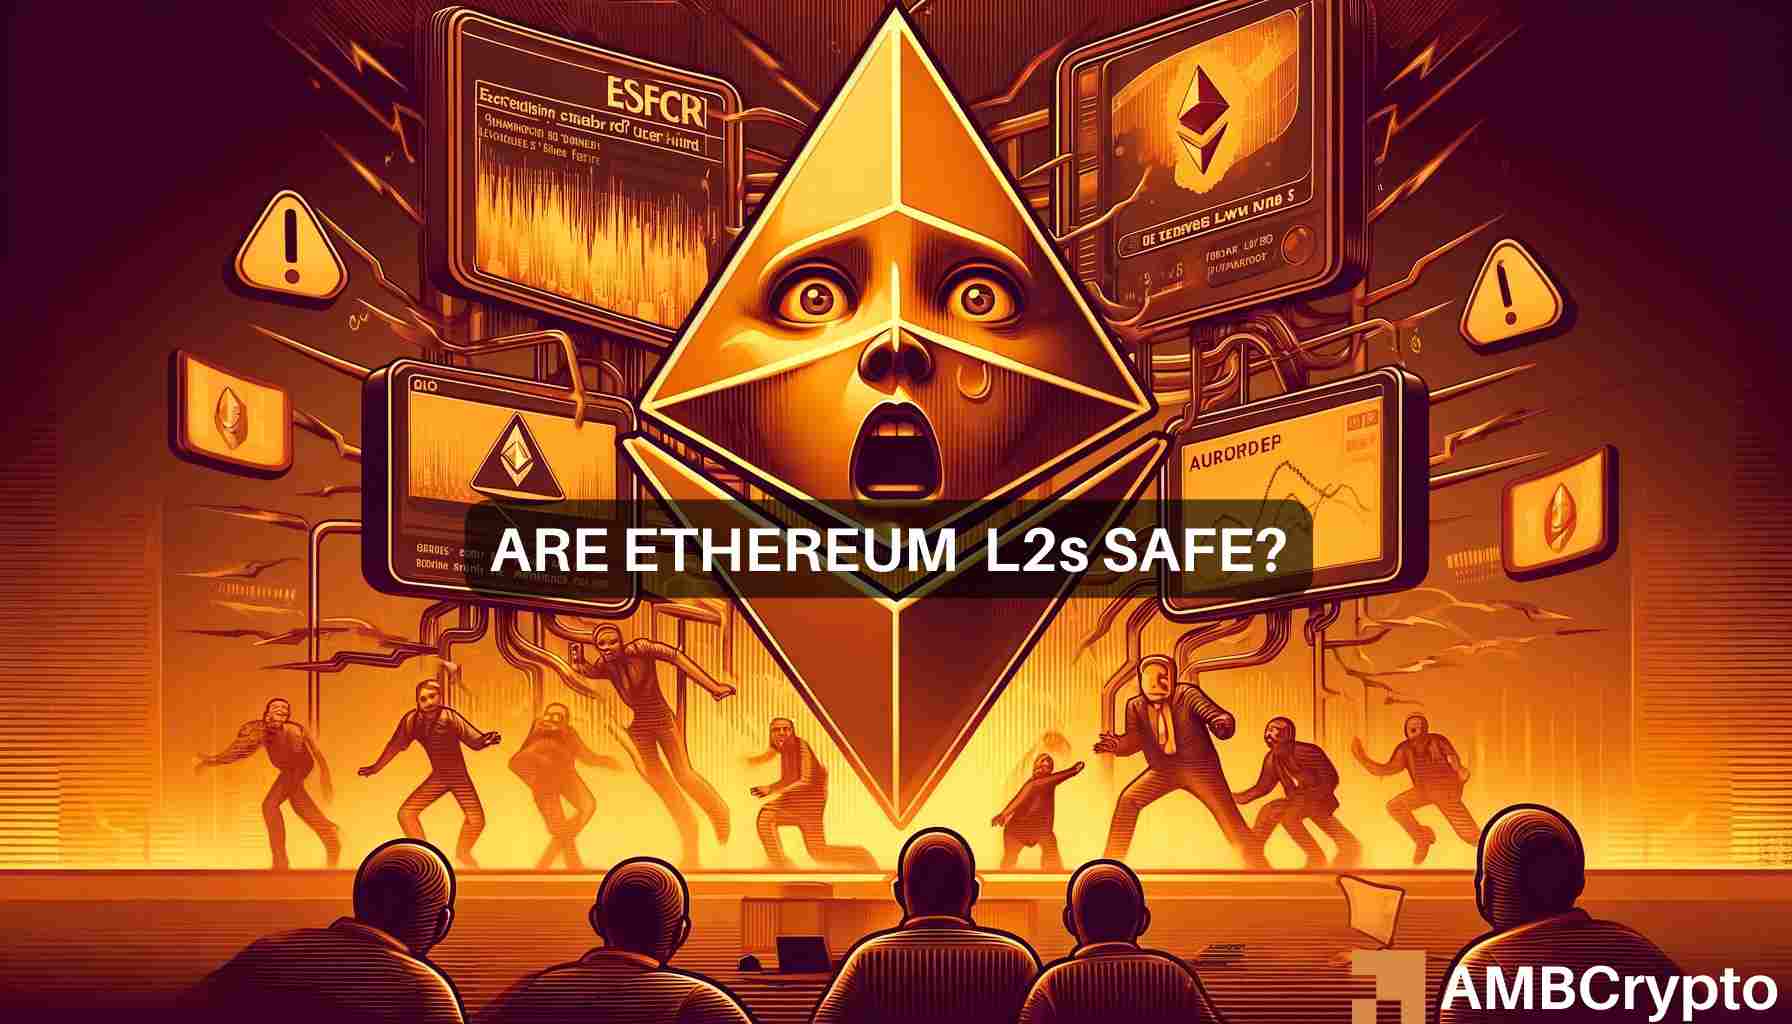 ‘Ethereum L2s can steal user funds right now’ – Are the allegations true?